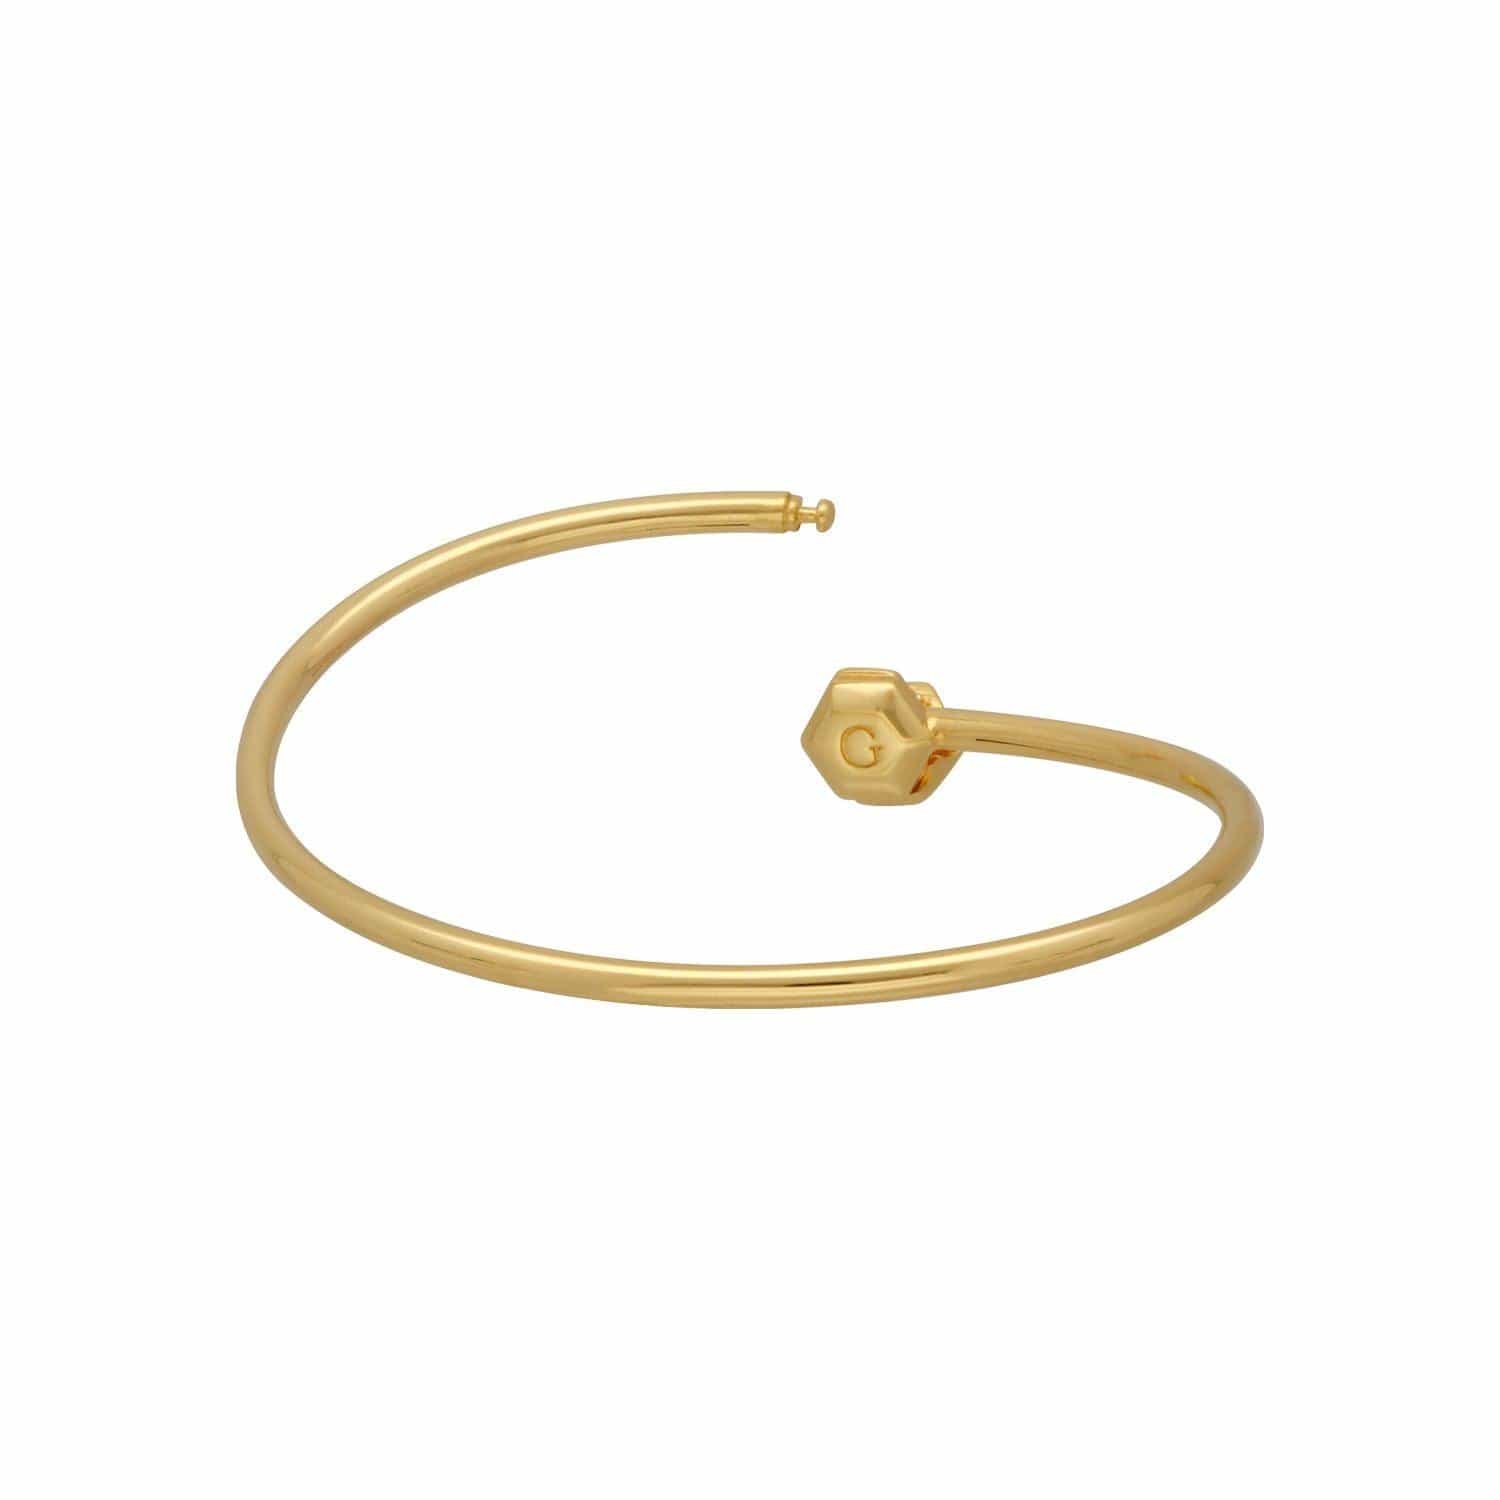 HS Achievement Bangle in gold plated sterling silver size medium 2